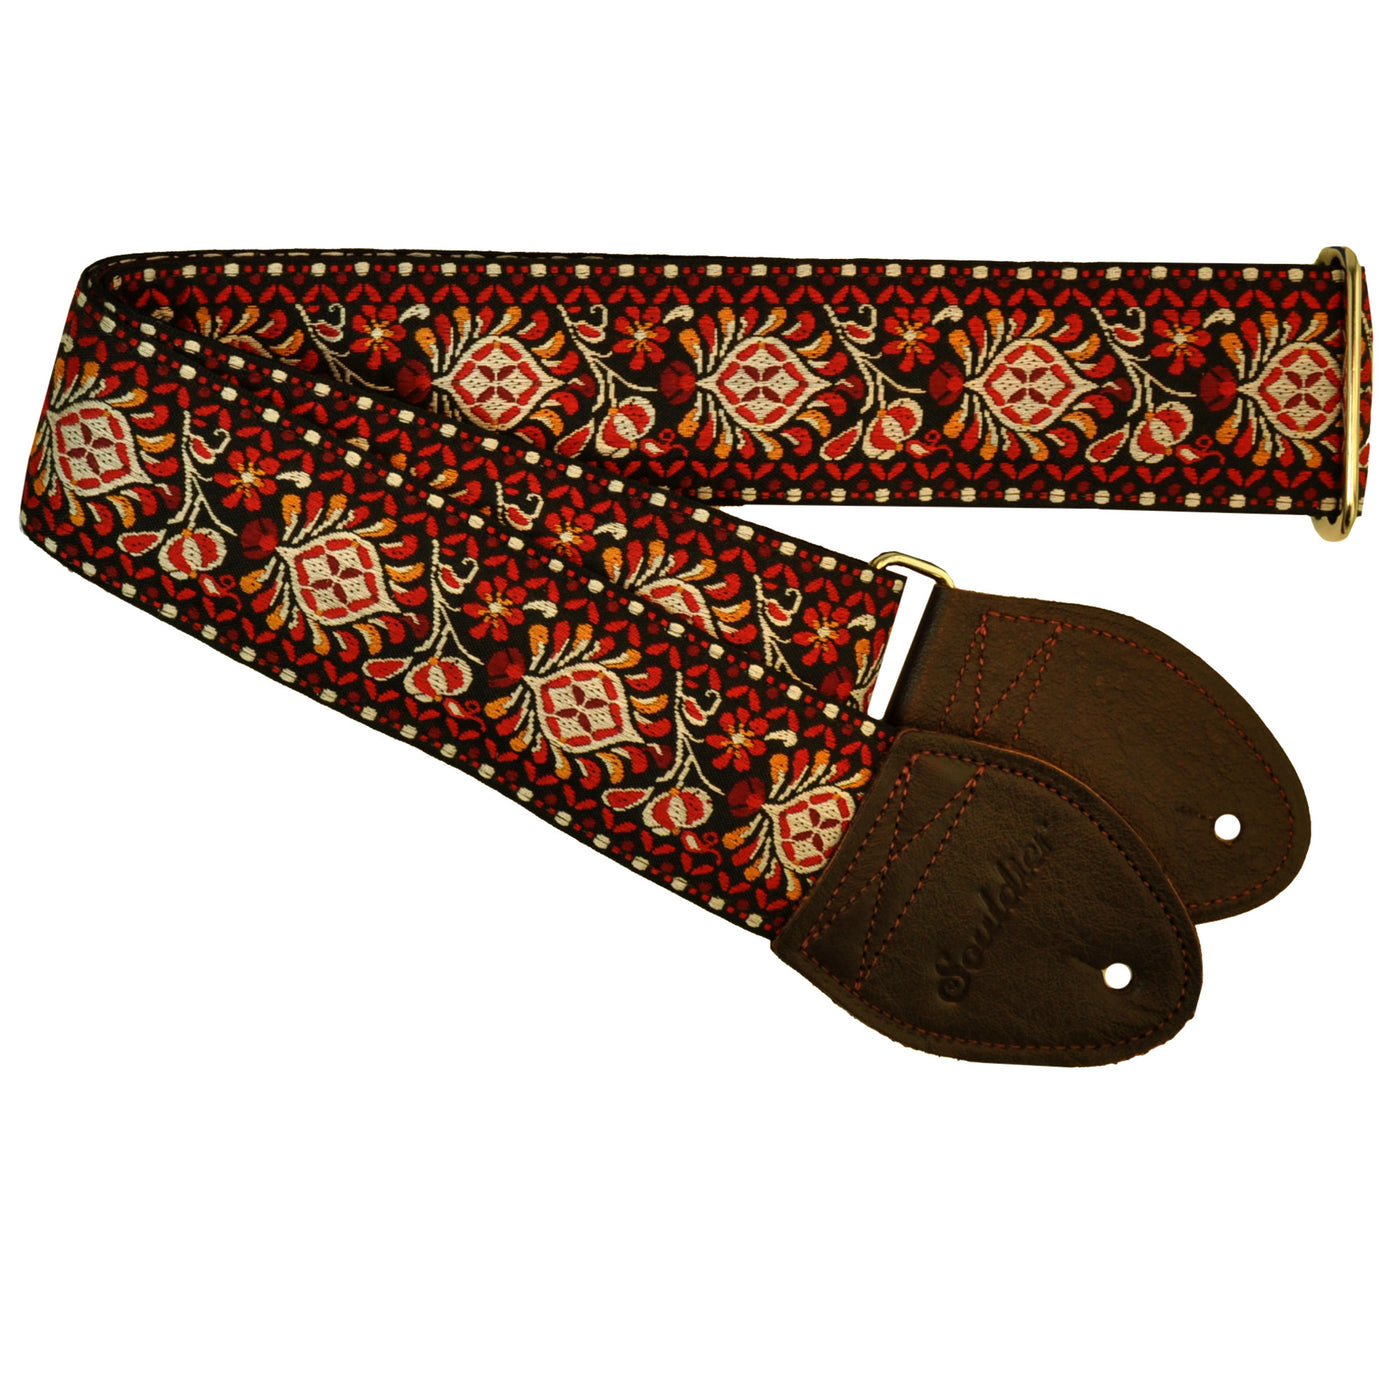 Souldier GS0242GD02WB - Handmade Seatbelt Guitar Strap for Bass, Electric or Acoustic Guitar, 2 Inches Wide and Adjustable Length from 30" to 63"  Made in the USA, Hendrix, Flame